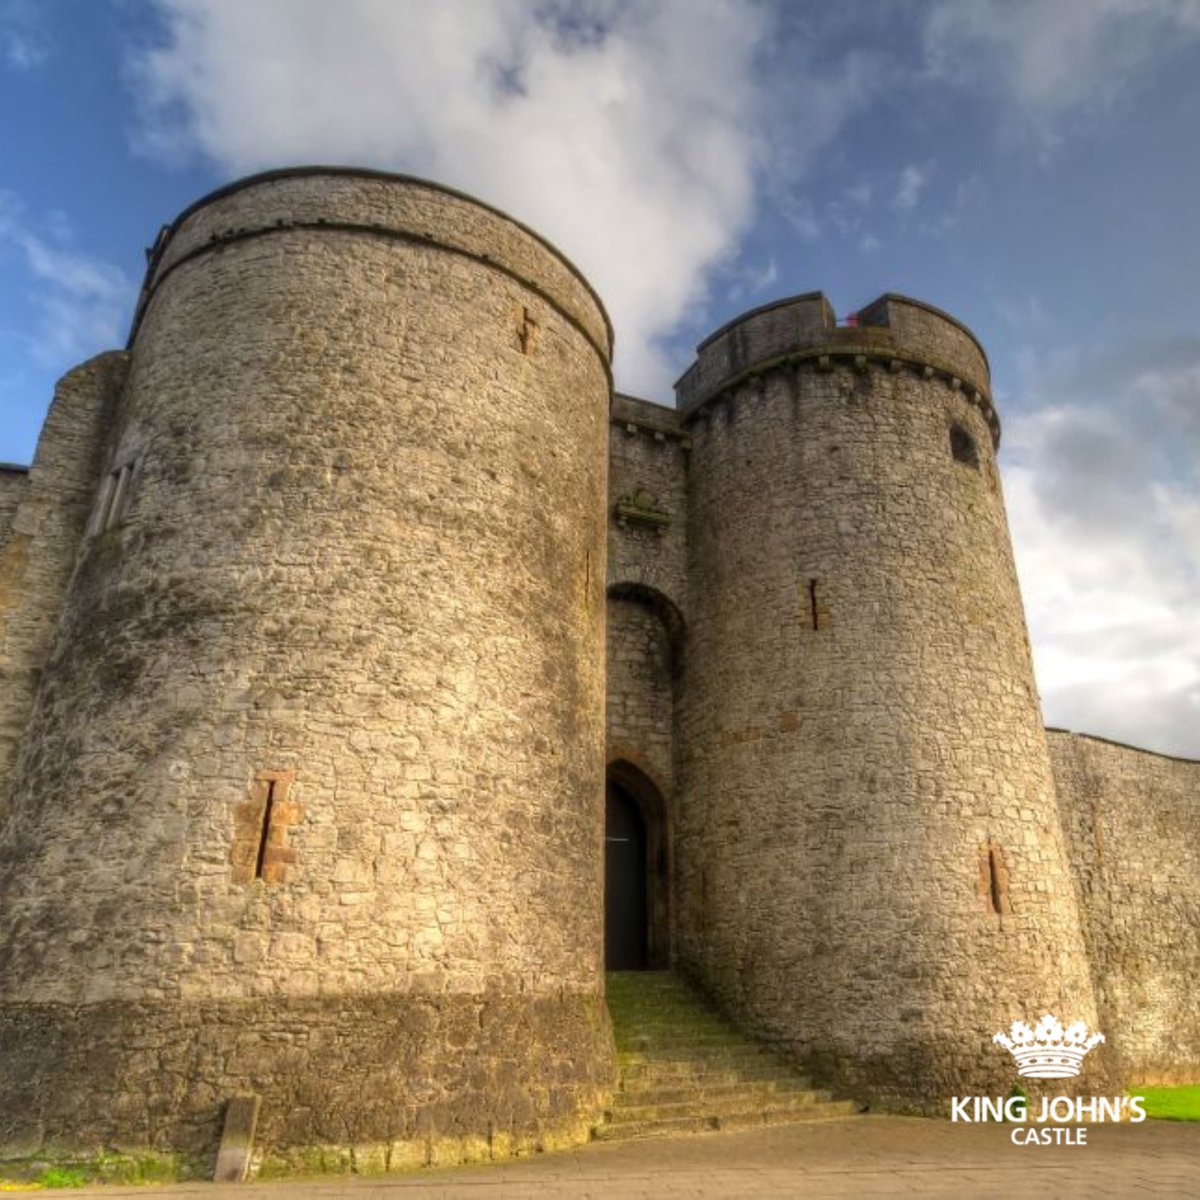 Situated proudly along the River Shannon, these towers have stories that stretch back to the 13th century. With each step up their worn stairs, you're transported to a time long gone, where knights roamed and battles raged ⚔️

Explore King John's Castle today!